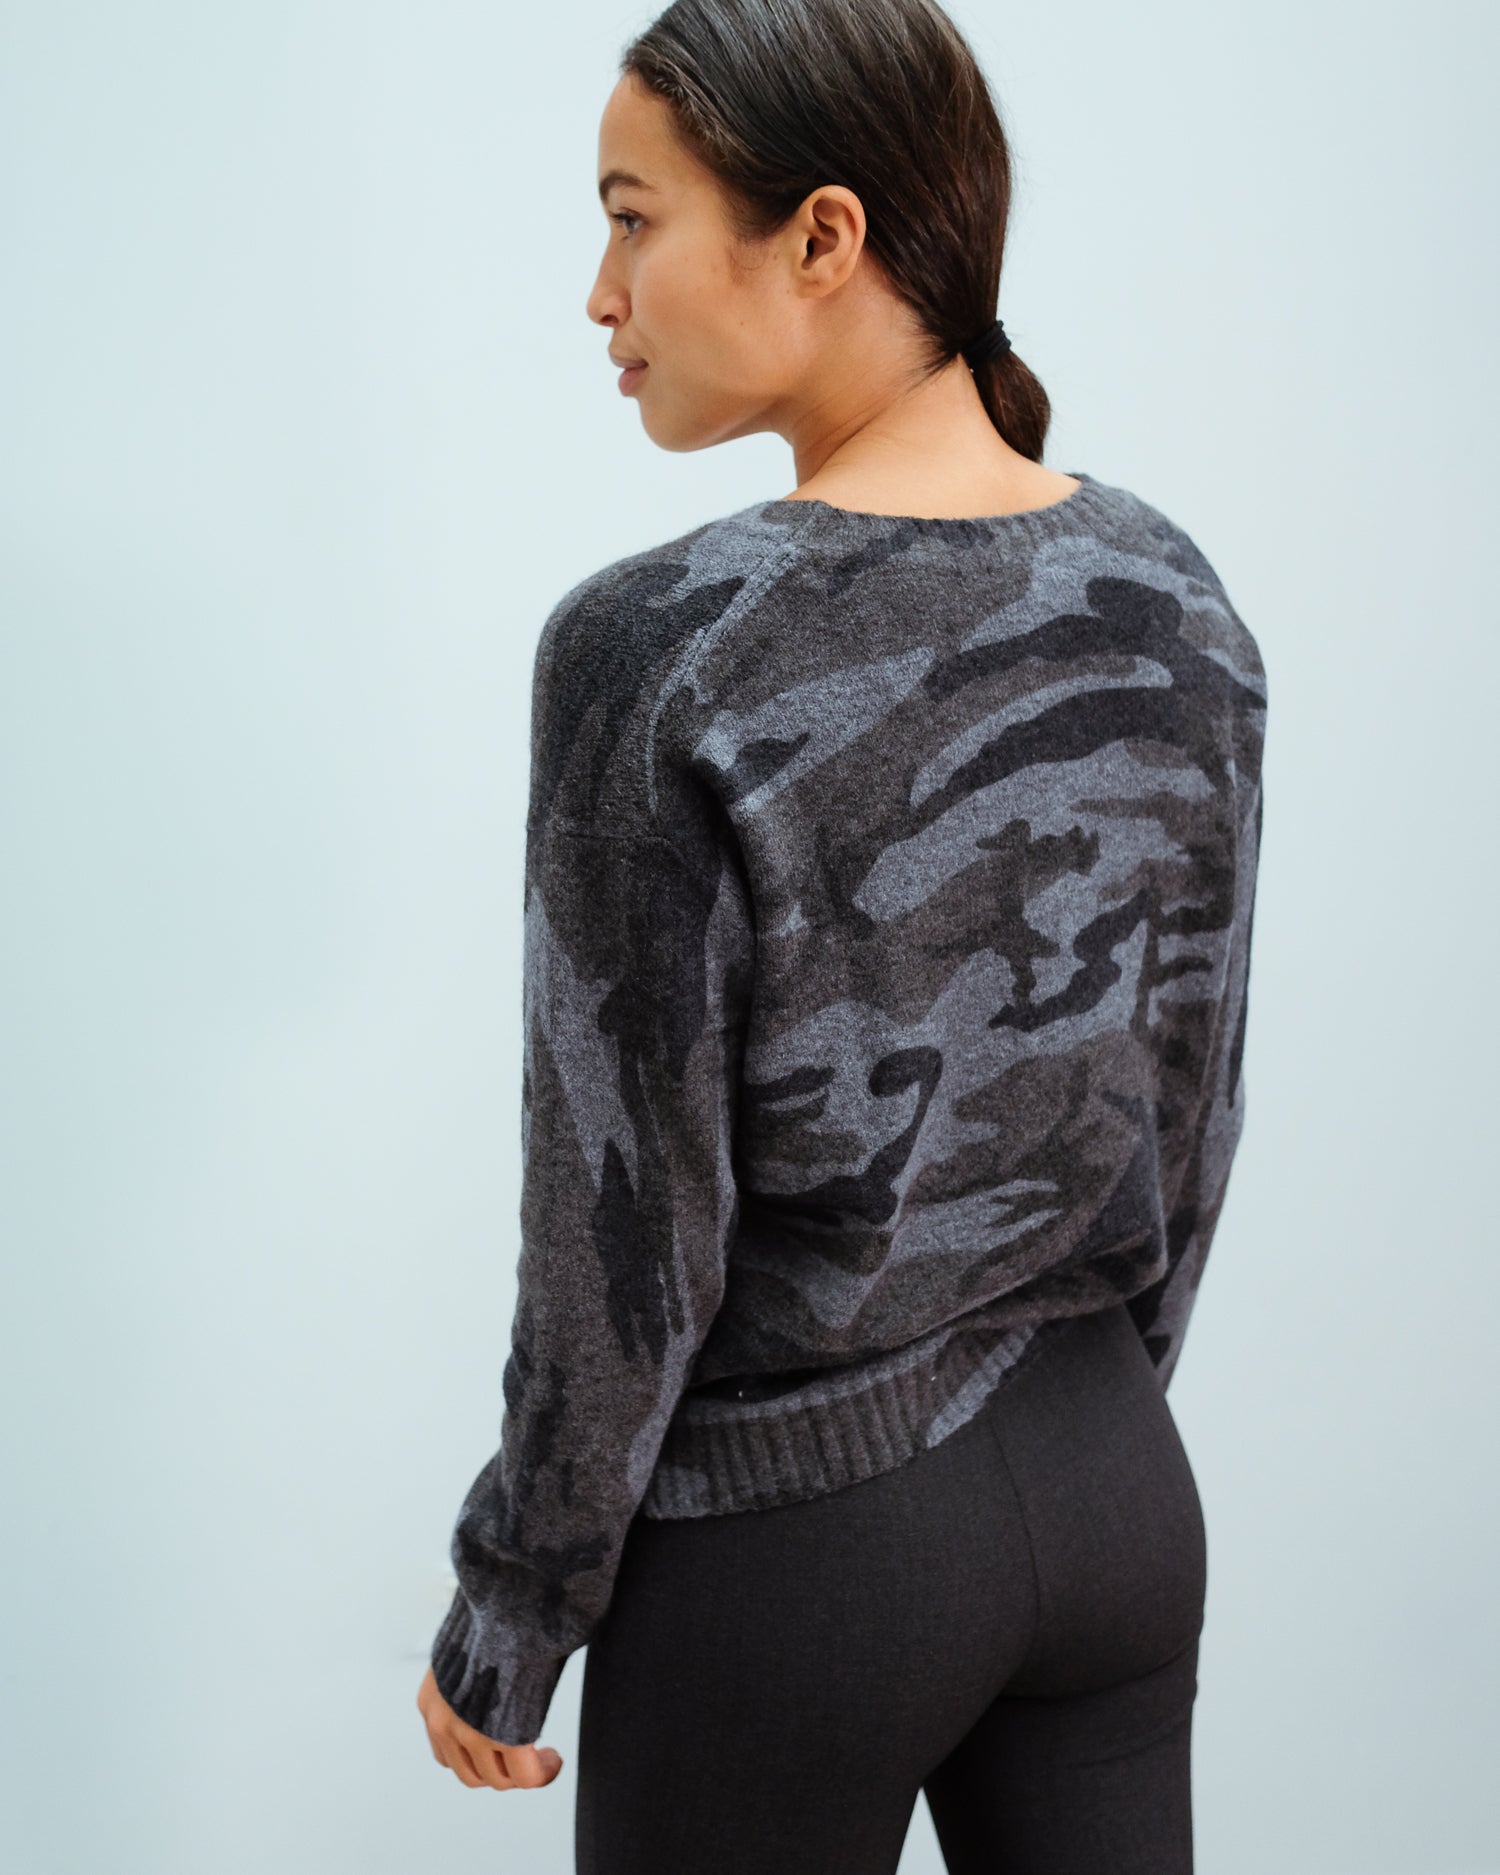 RAILS Louis knit in charcoal camo